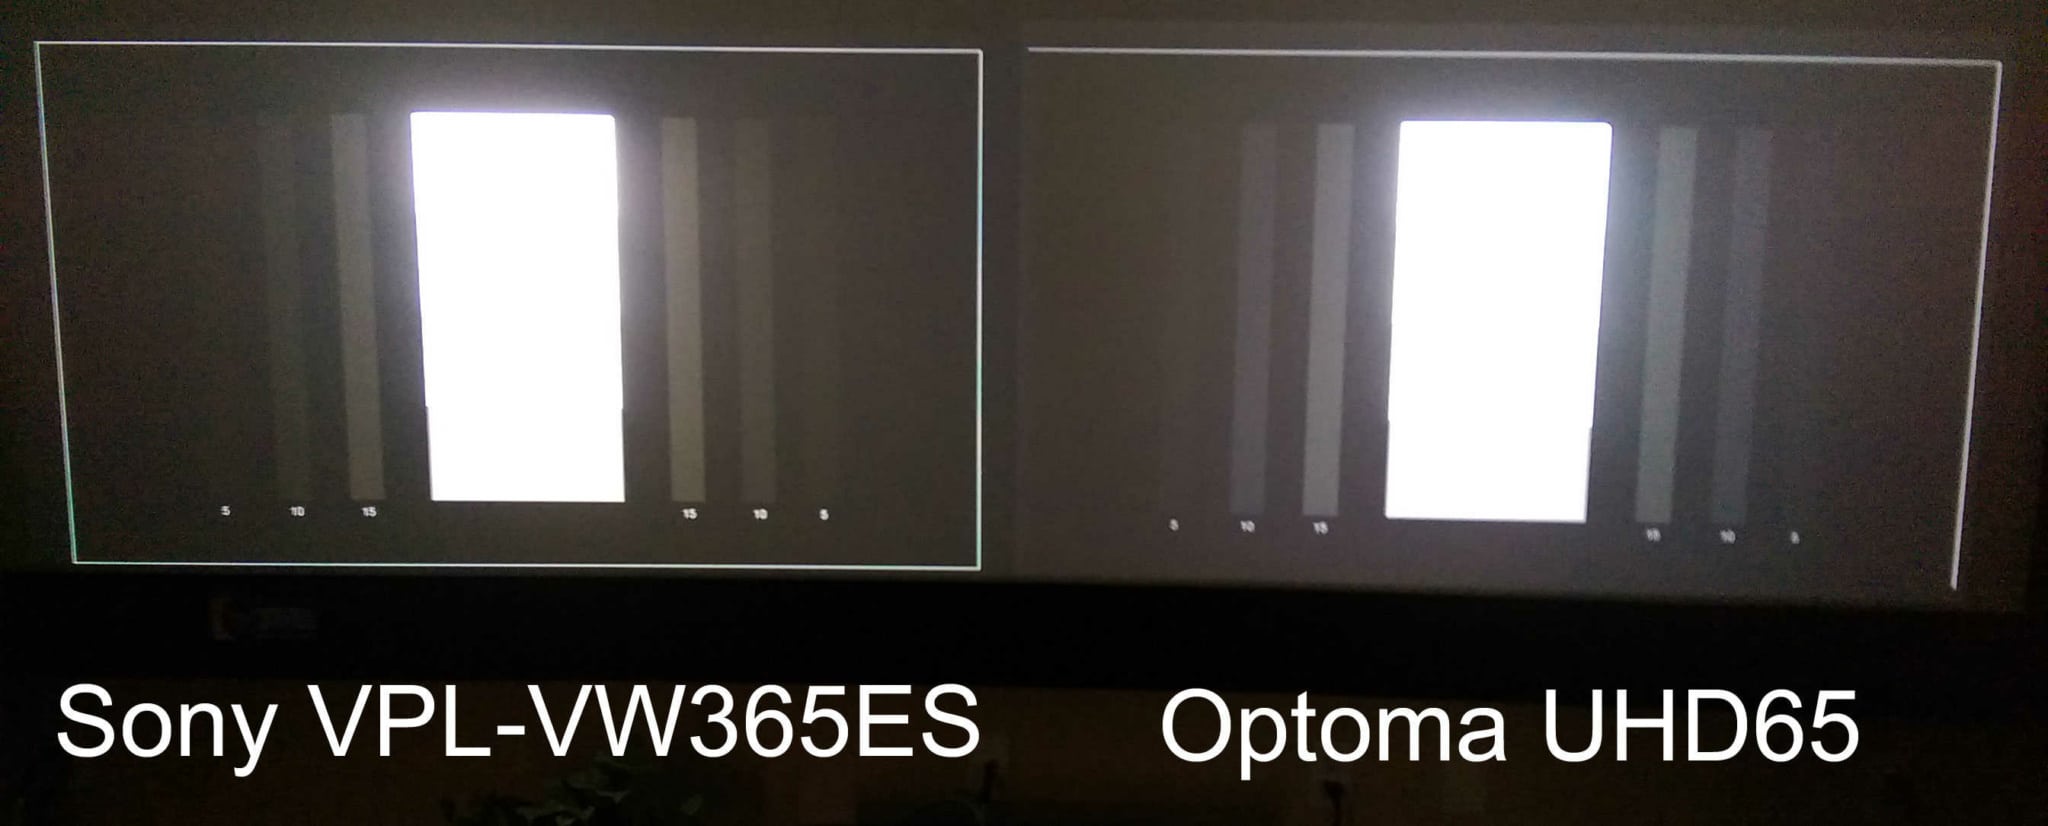 Sony VPL-VW365ES vs Optoma UHD65: After setting pluge and overexposing this image (causing loss of grayscale) differences in native black levels can be observed in this image.